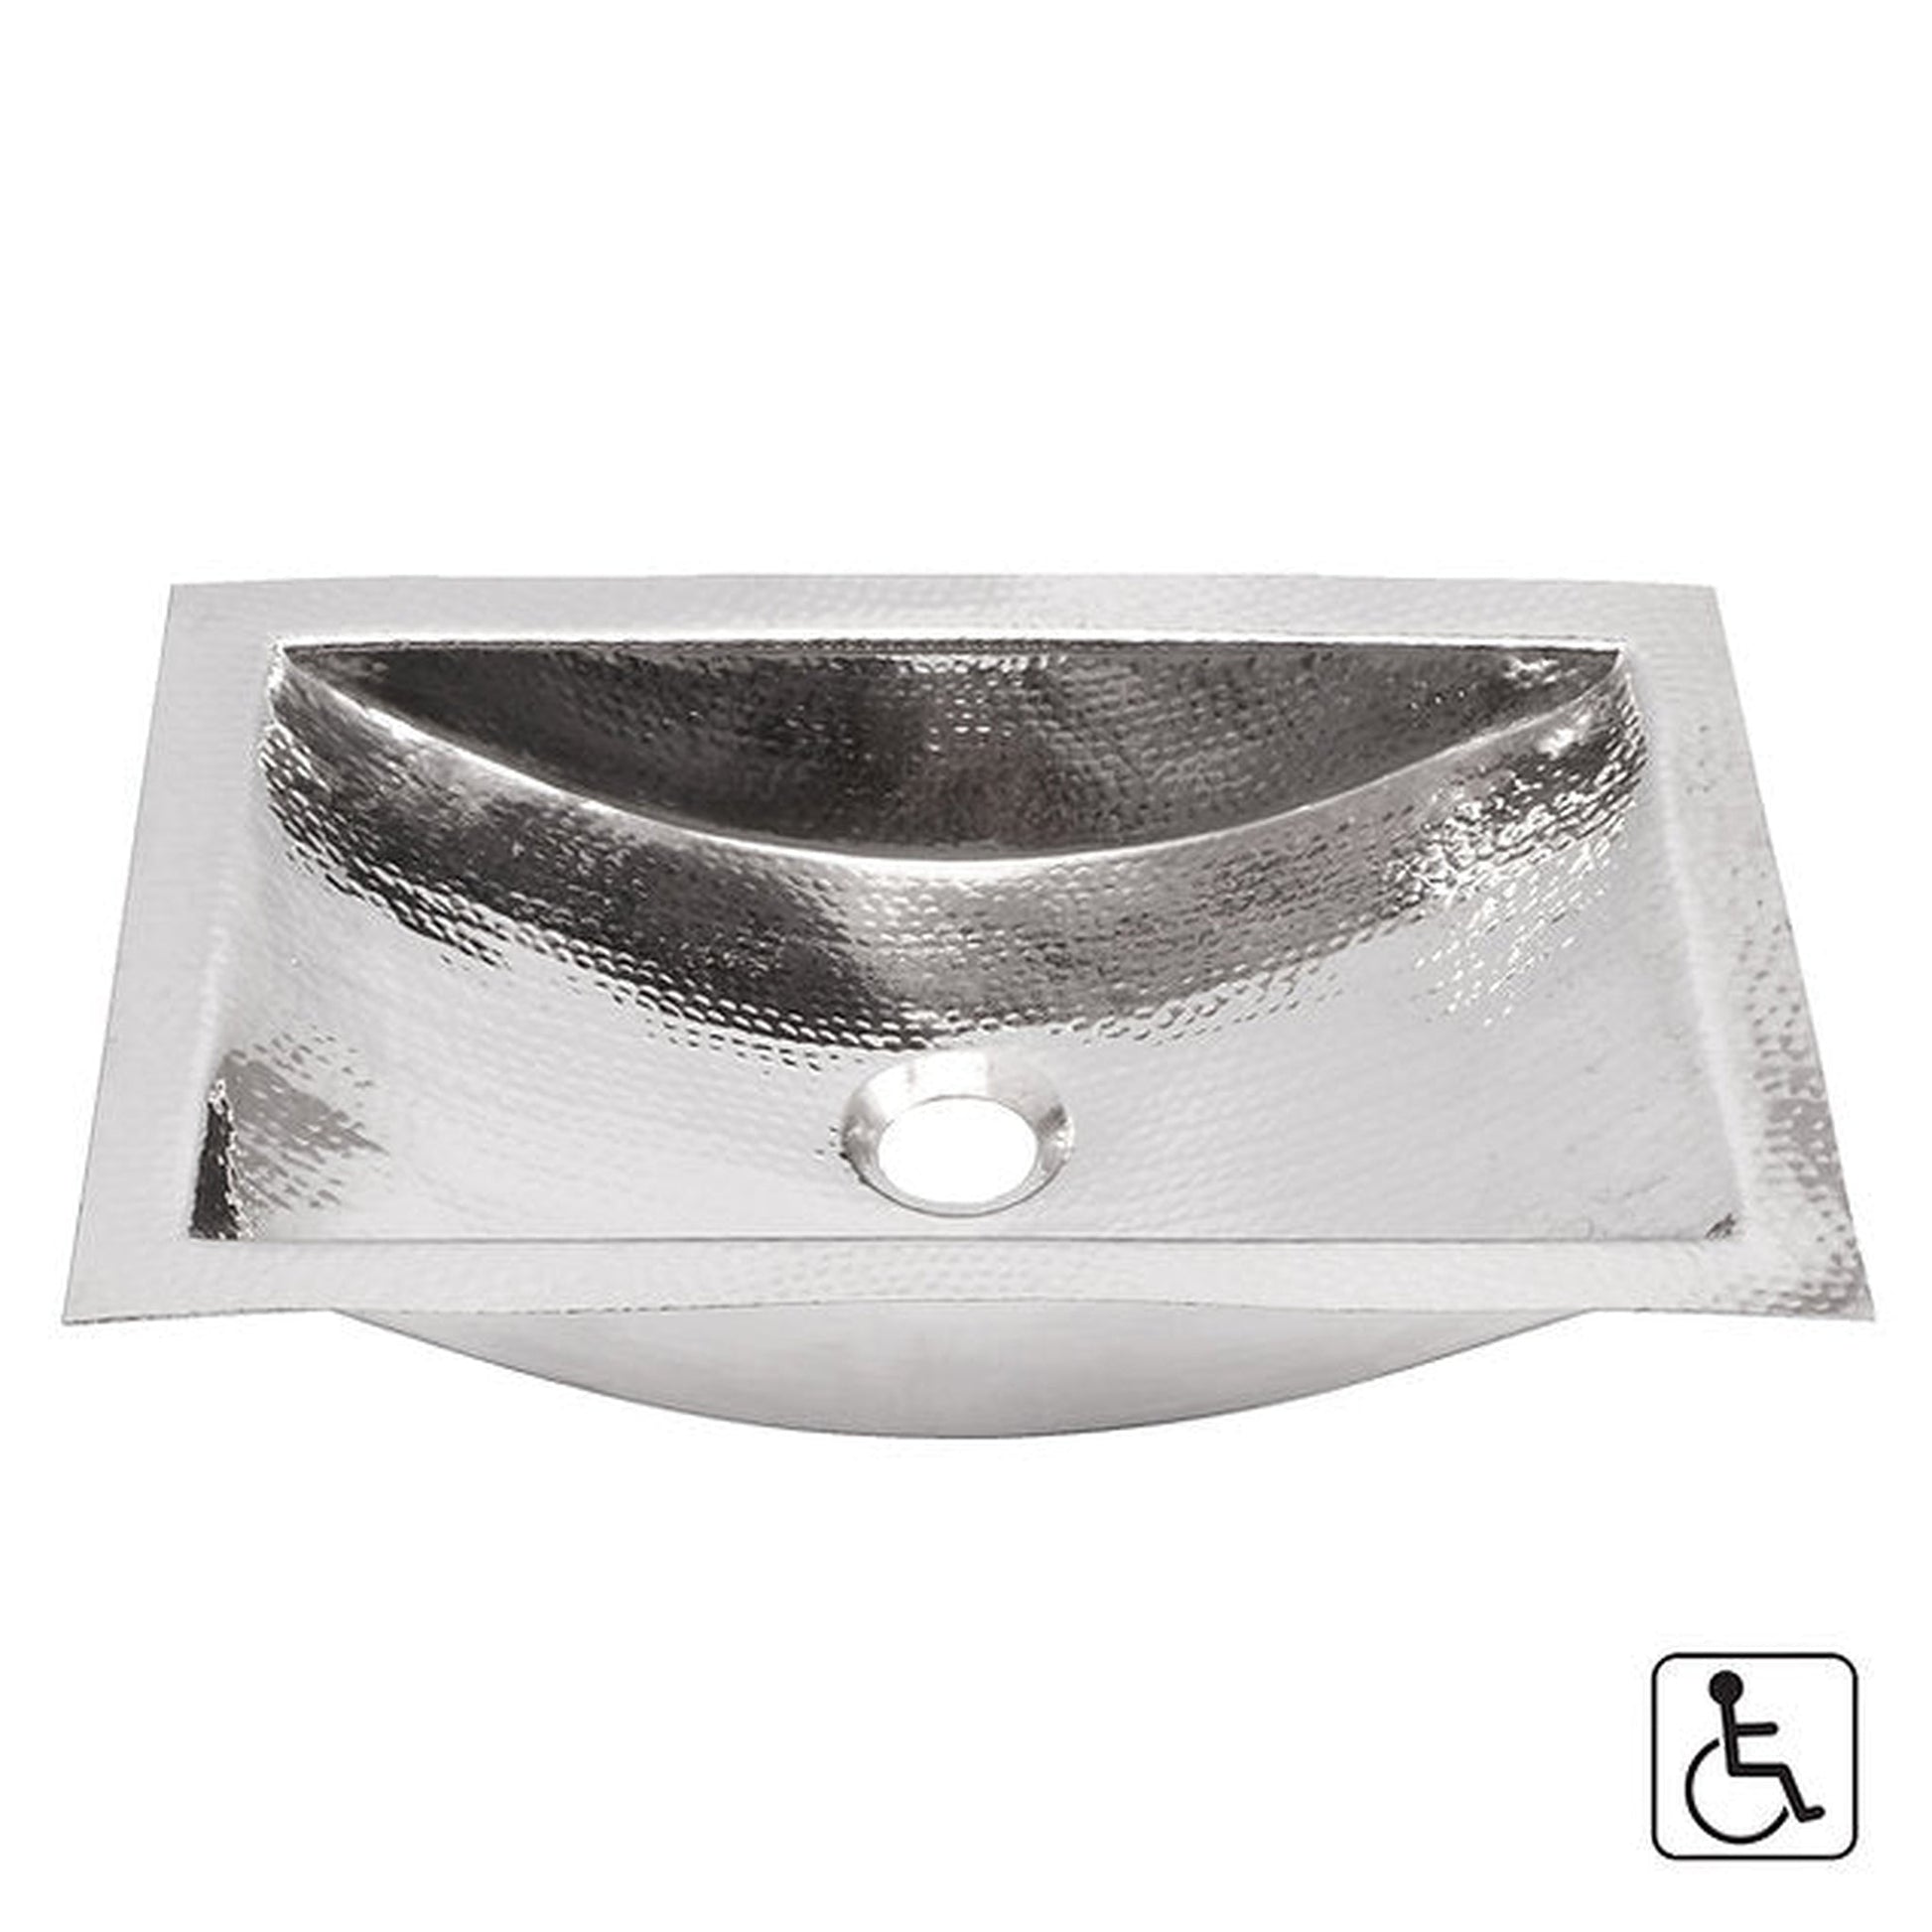 Nantucket Sinks Brightwork Home 20" W x 13" D" Rectangular Hand Hammered Polished Stainless Steel Dualmount Sink